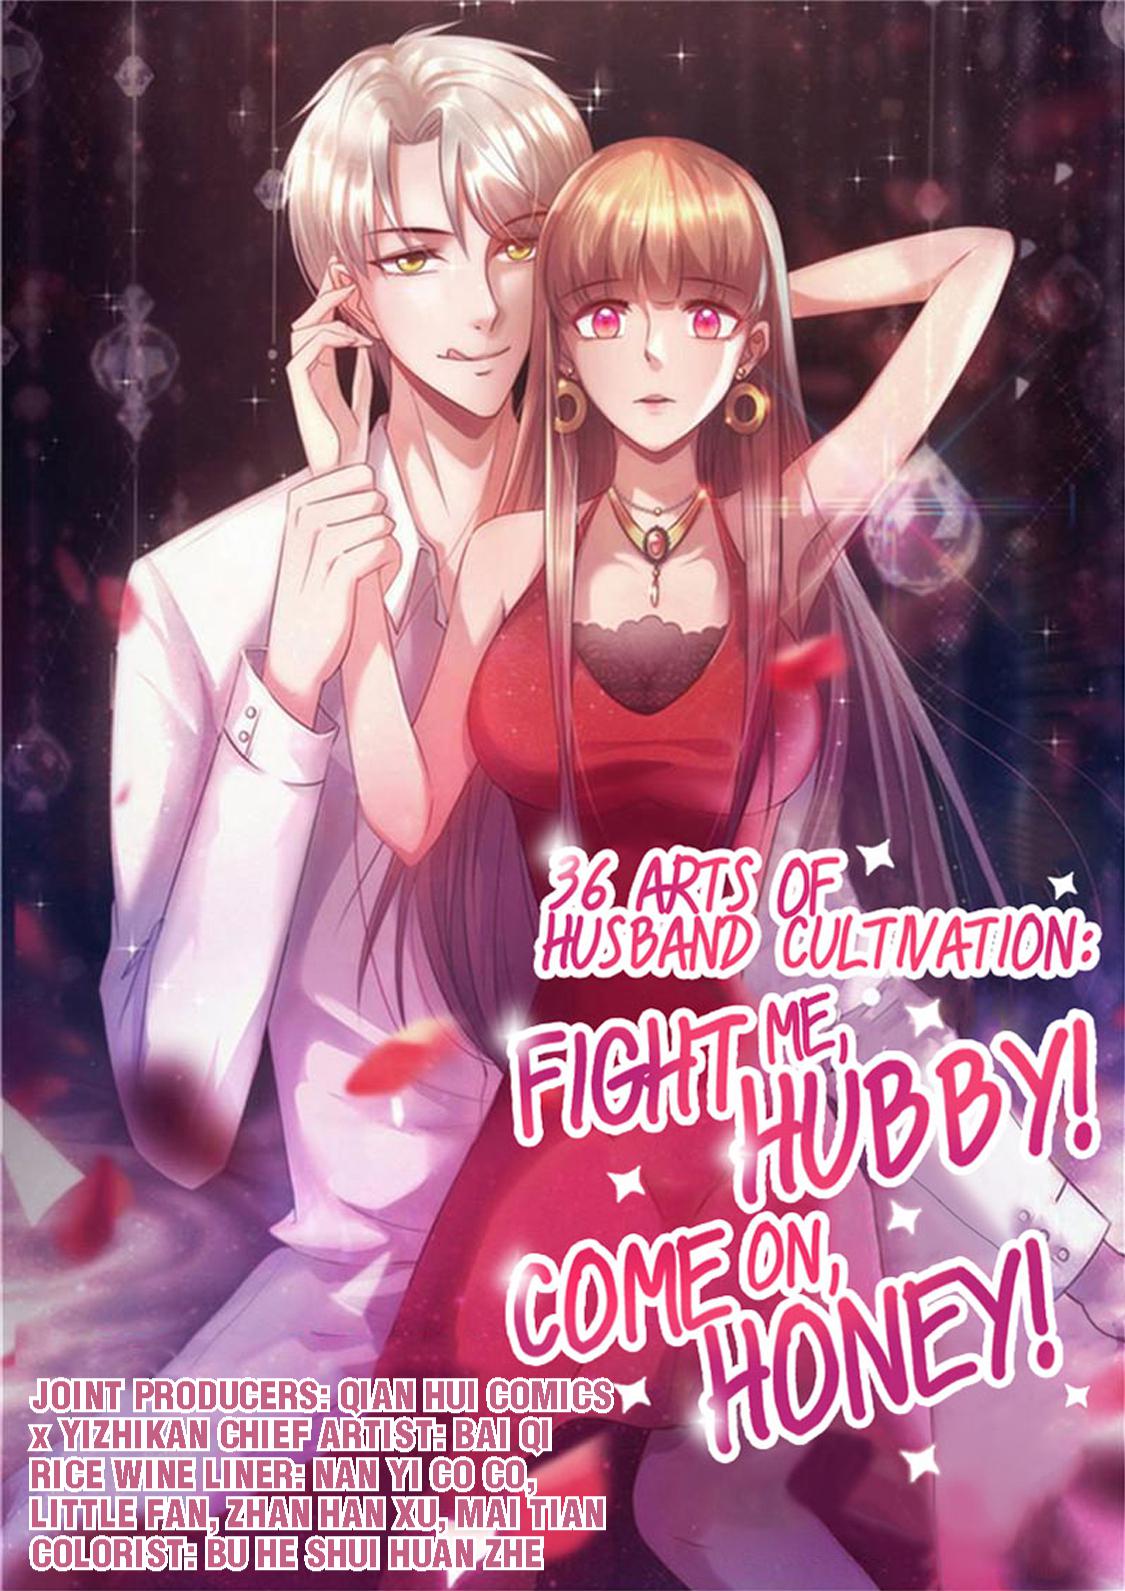 36 Arts of Husband Cultivation: Fight me, Hubby! Come on, Honey! 32